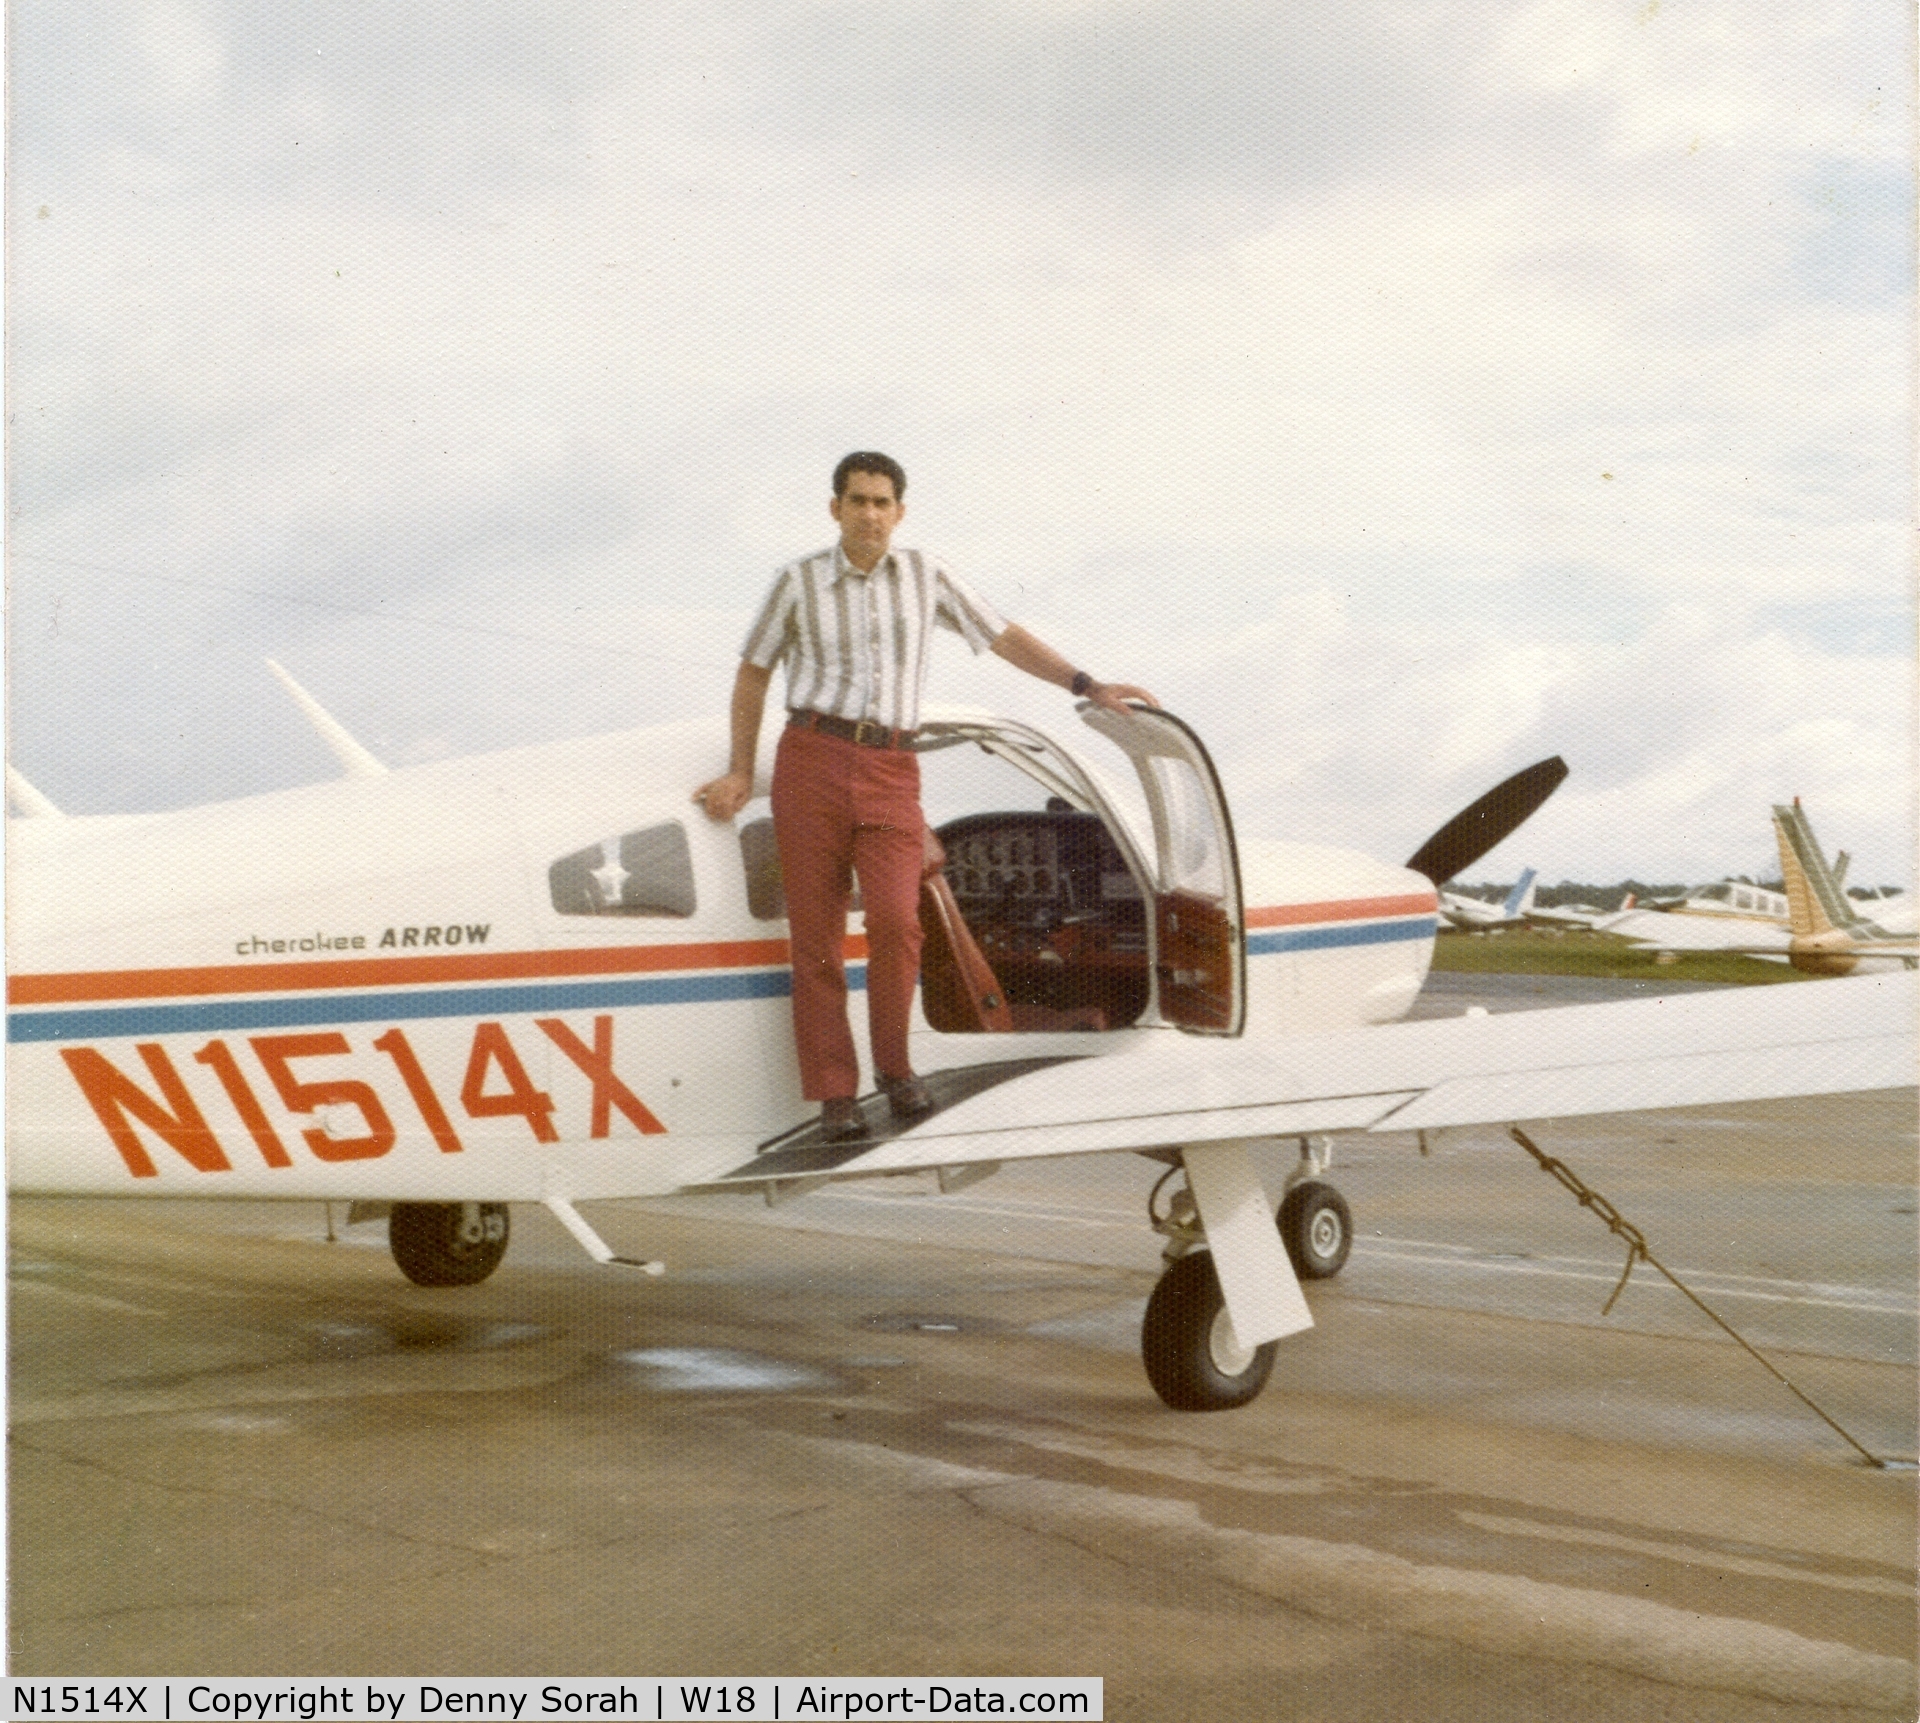 N1514X, Piper PA-28R-200 C/N 28R-7535305, Denny Sorah (in photo) and Bill Spruill 9first owners) picked the new airplane up from the Piper factory in Vero Beach, FL on 6/23/1975 and flew it to it's first home at Suburban Airport between DC and Baltimore, MD. 6.7 hours flight from VRB to Suburban.